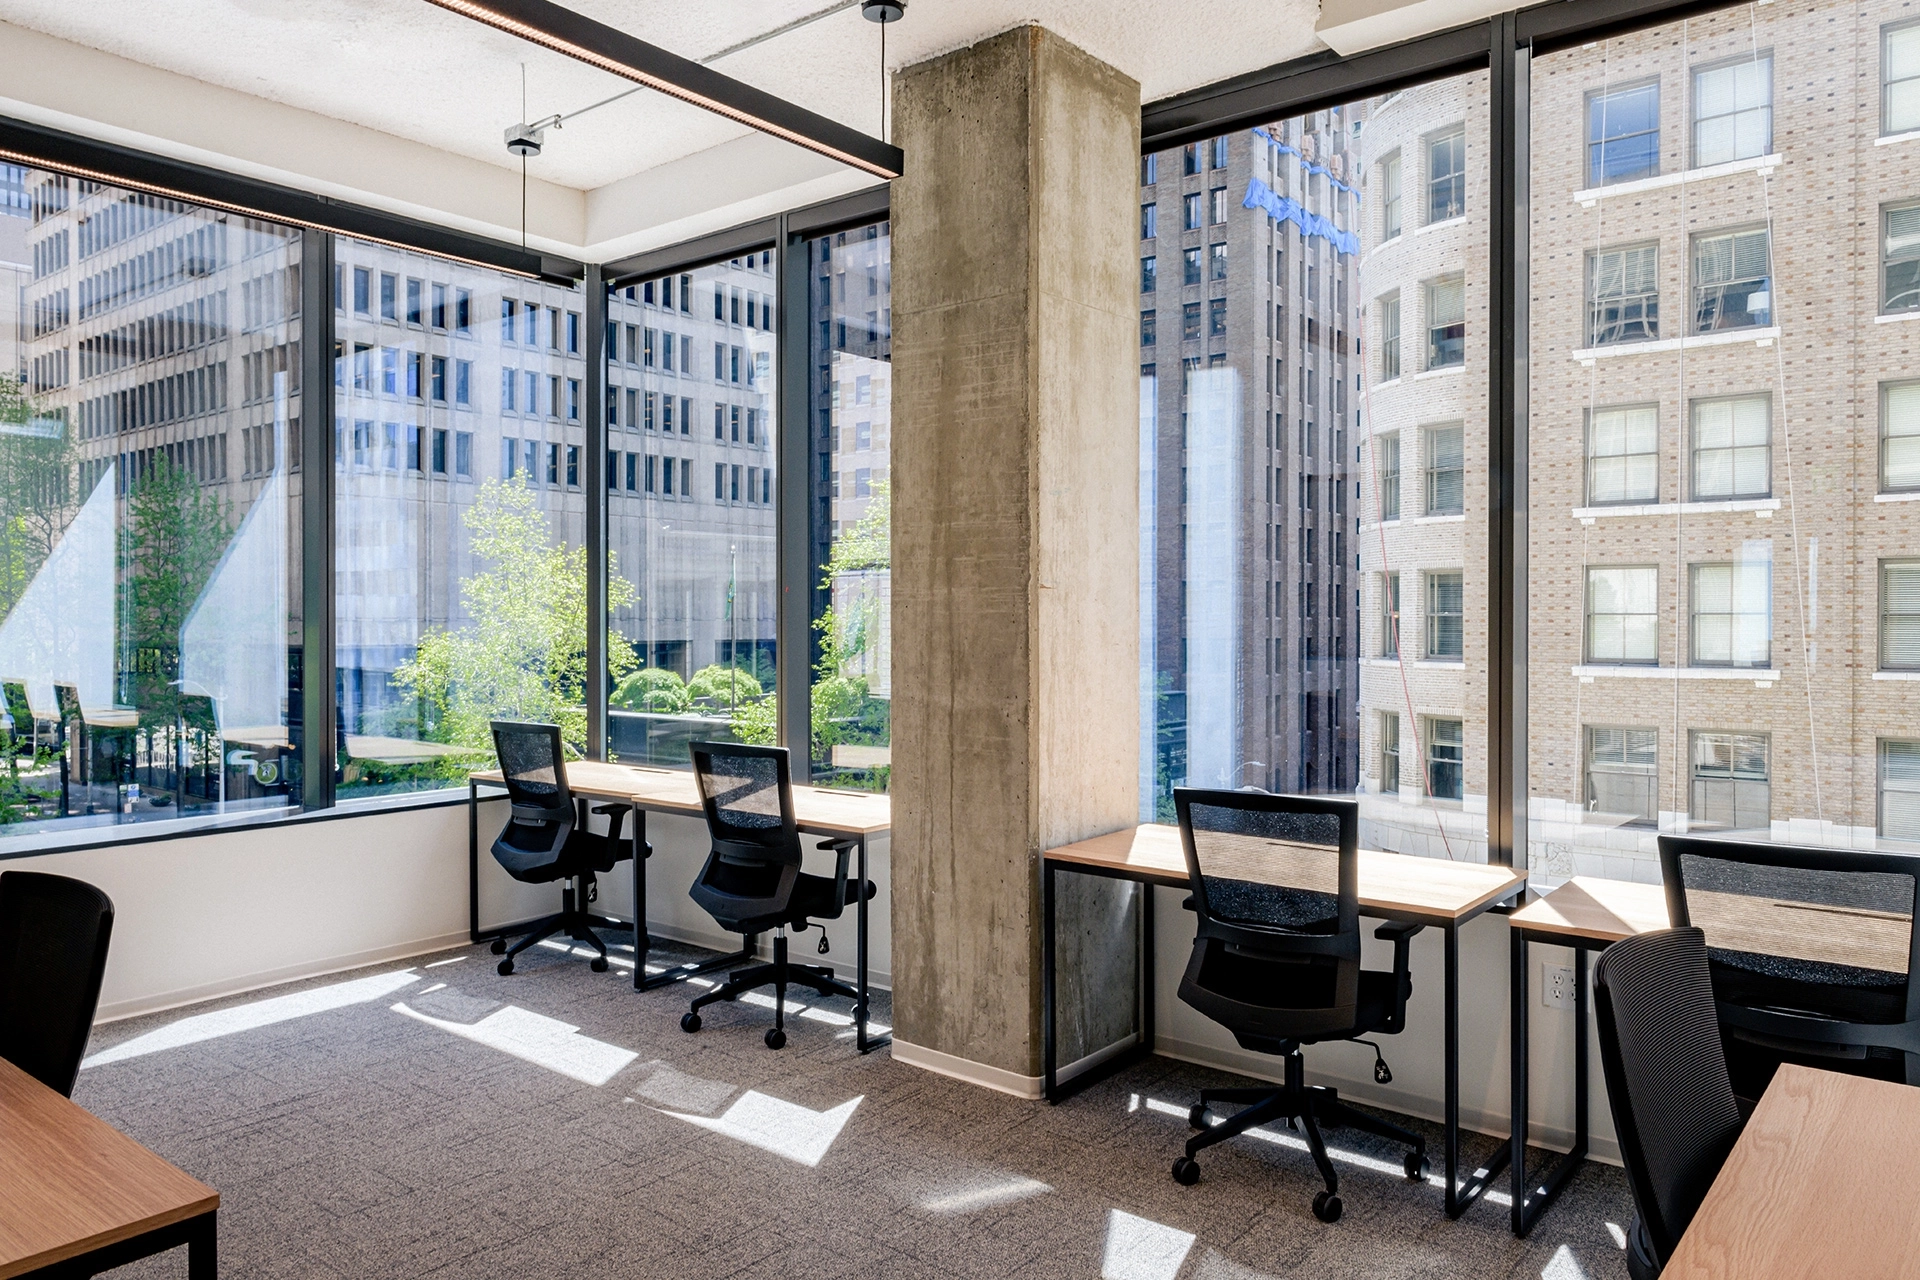 An open workspace with large windows overlooking a city.